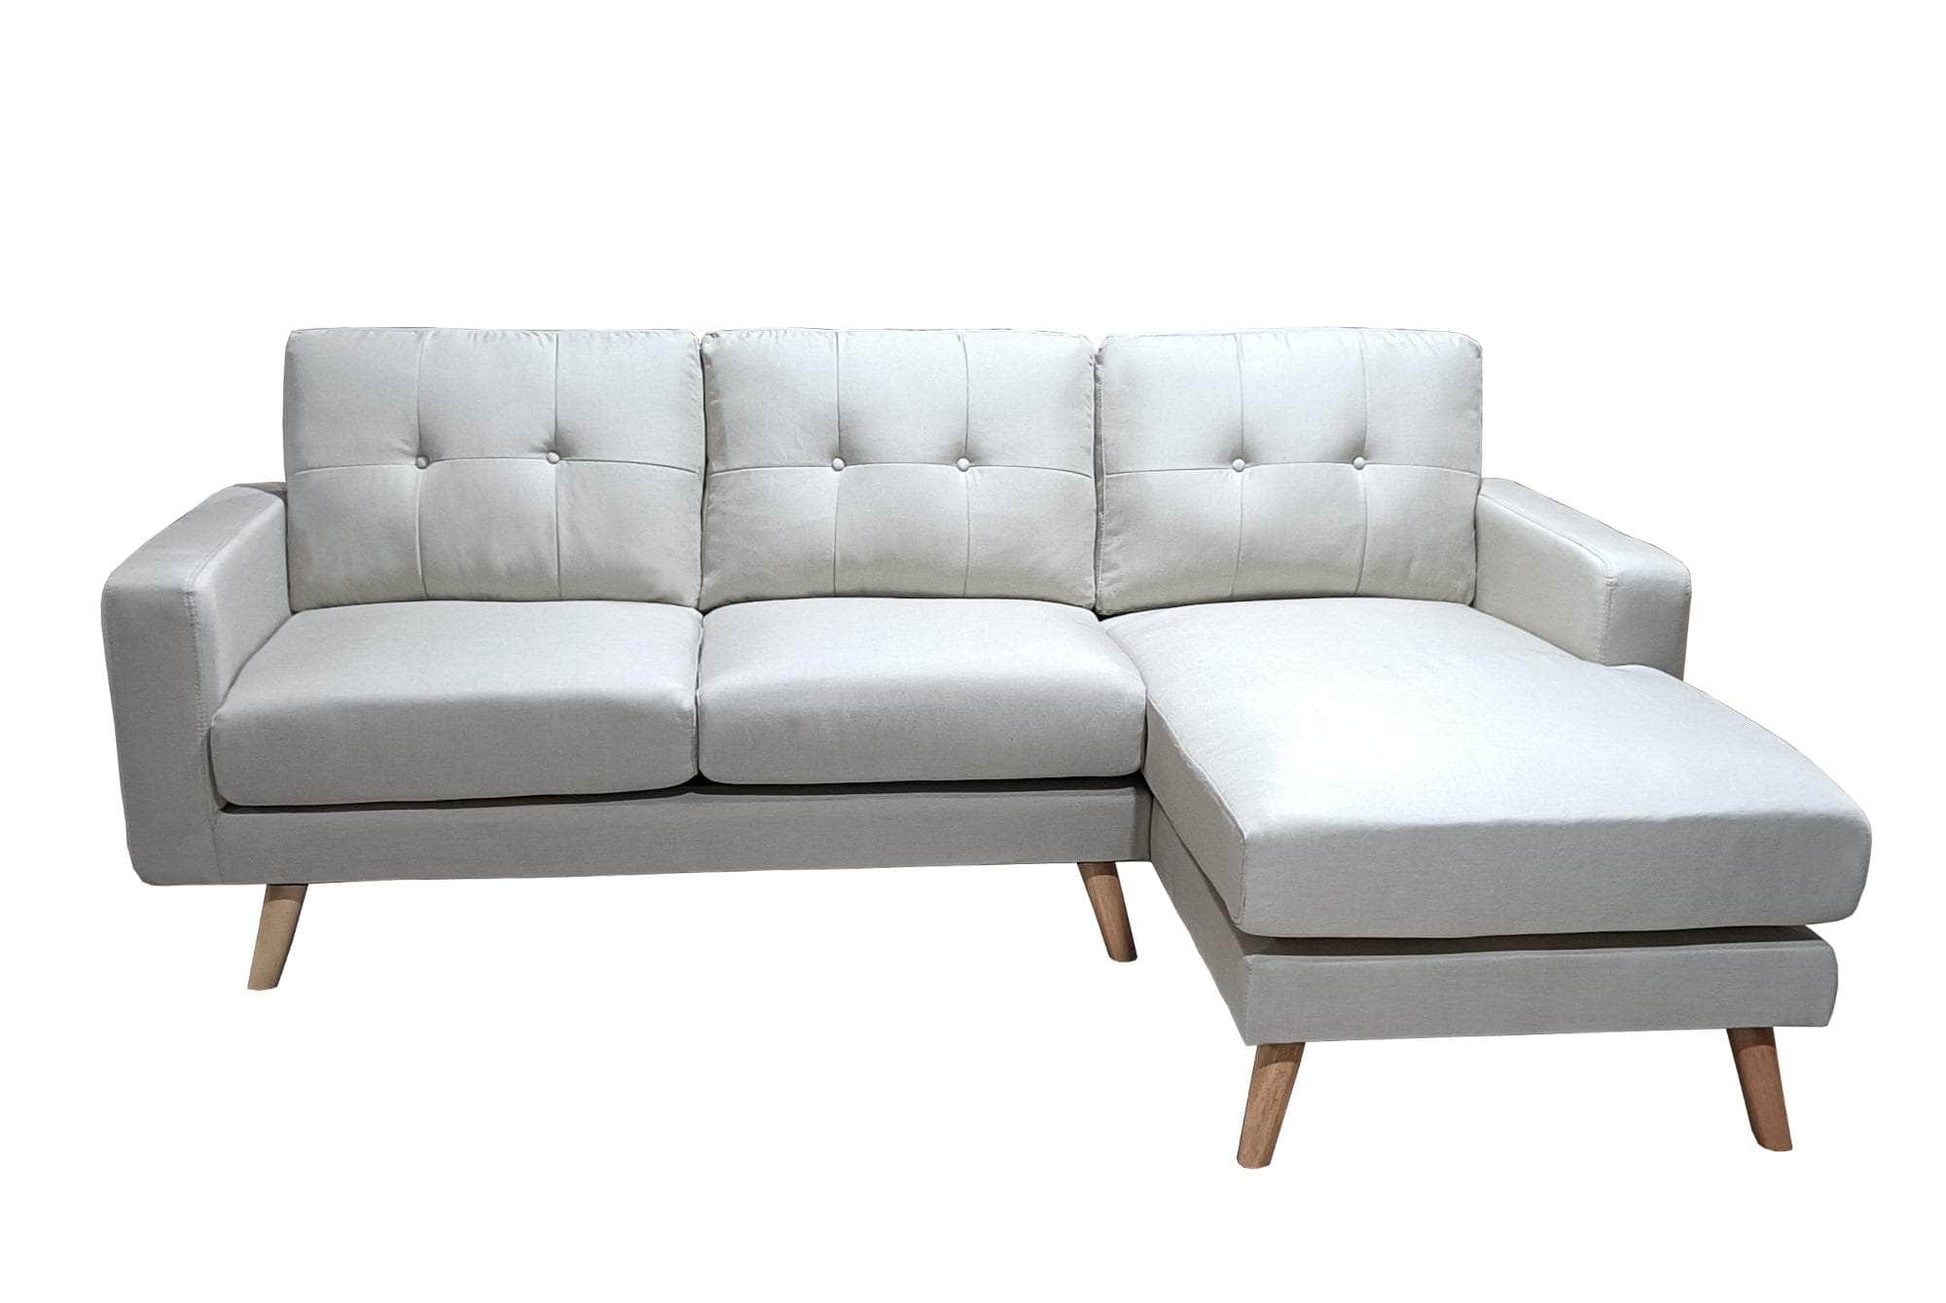 Urban Cali Sectional Cream / Right Facing Chaise San Marino 87.75" Wide Tufted Linen Sectional Sofa - Available in 2 Colours